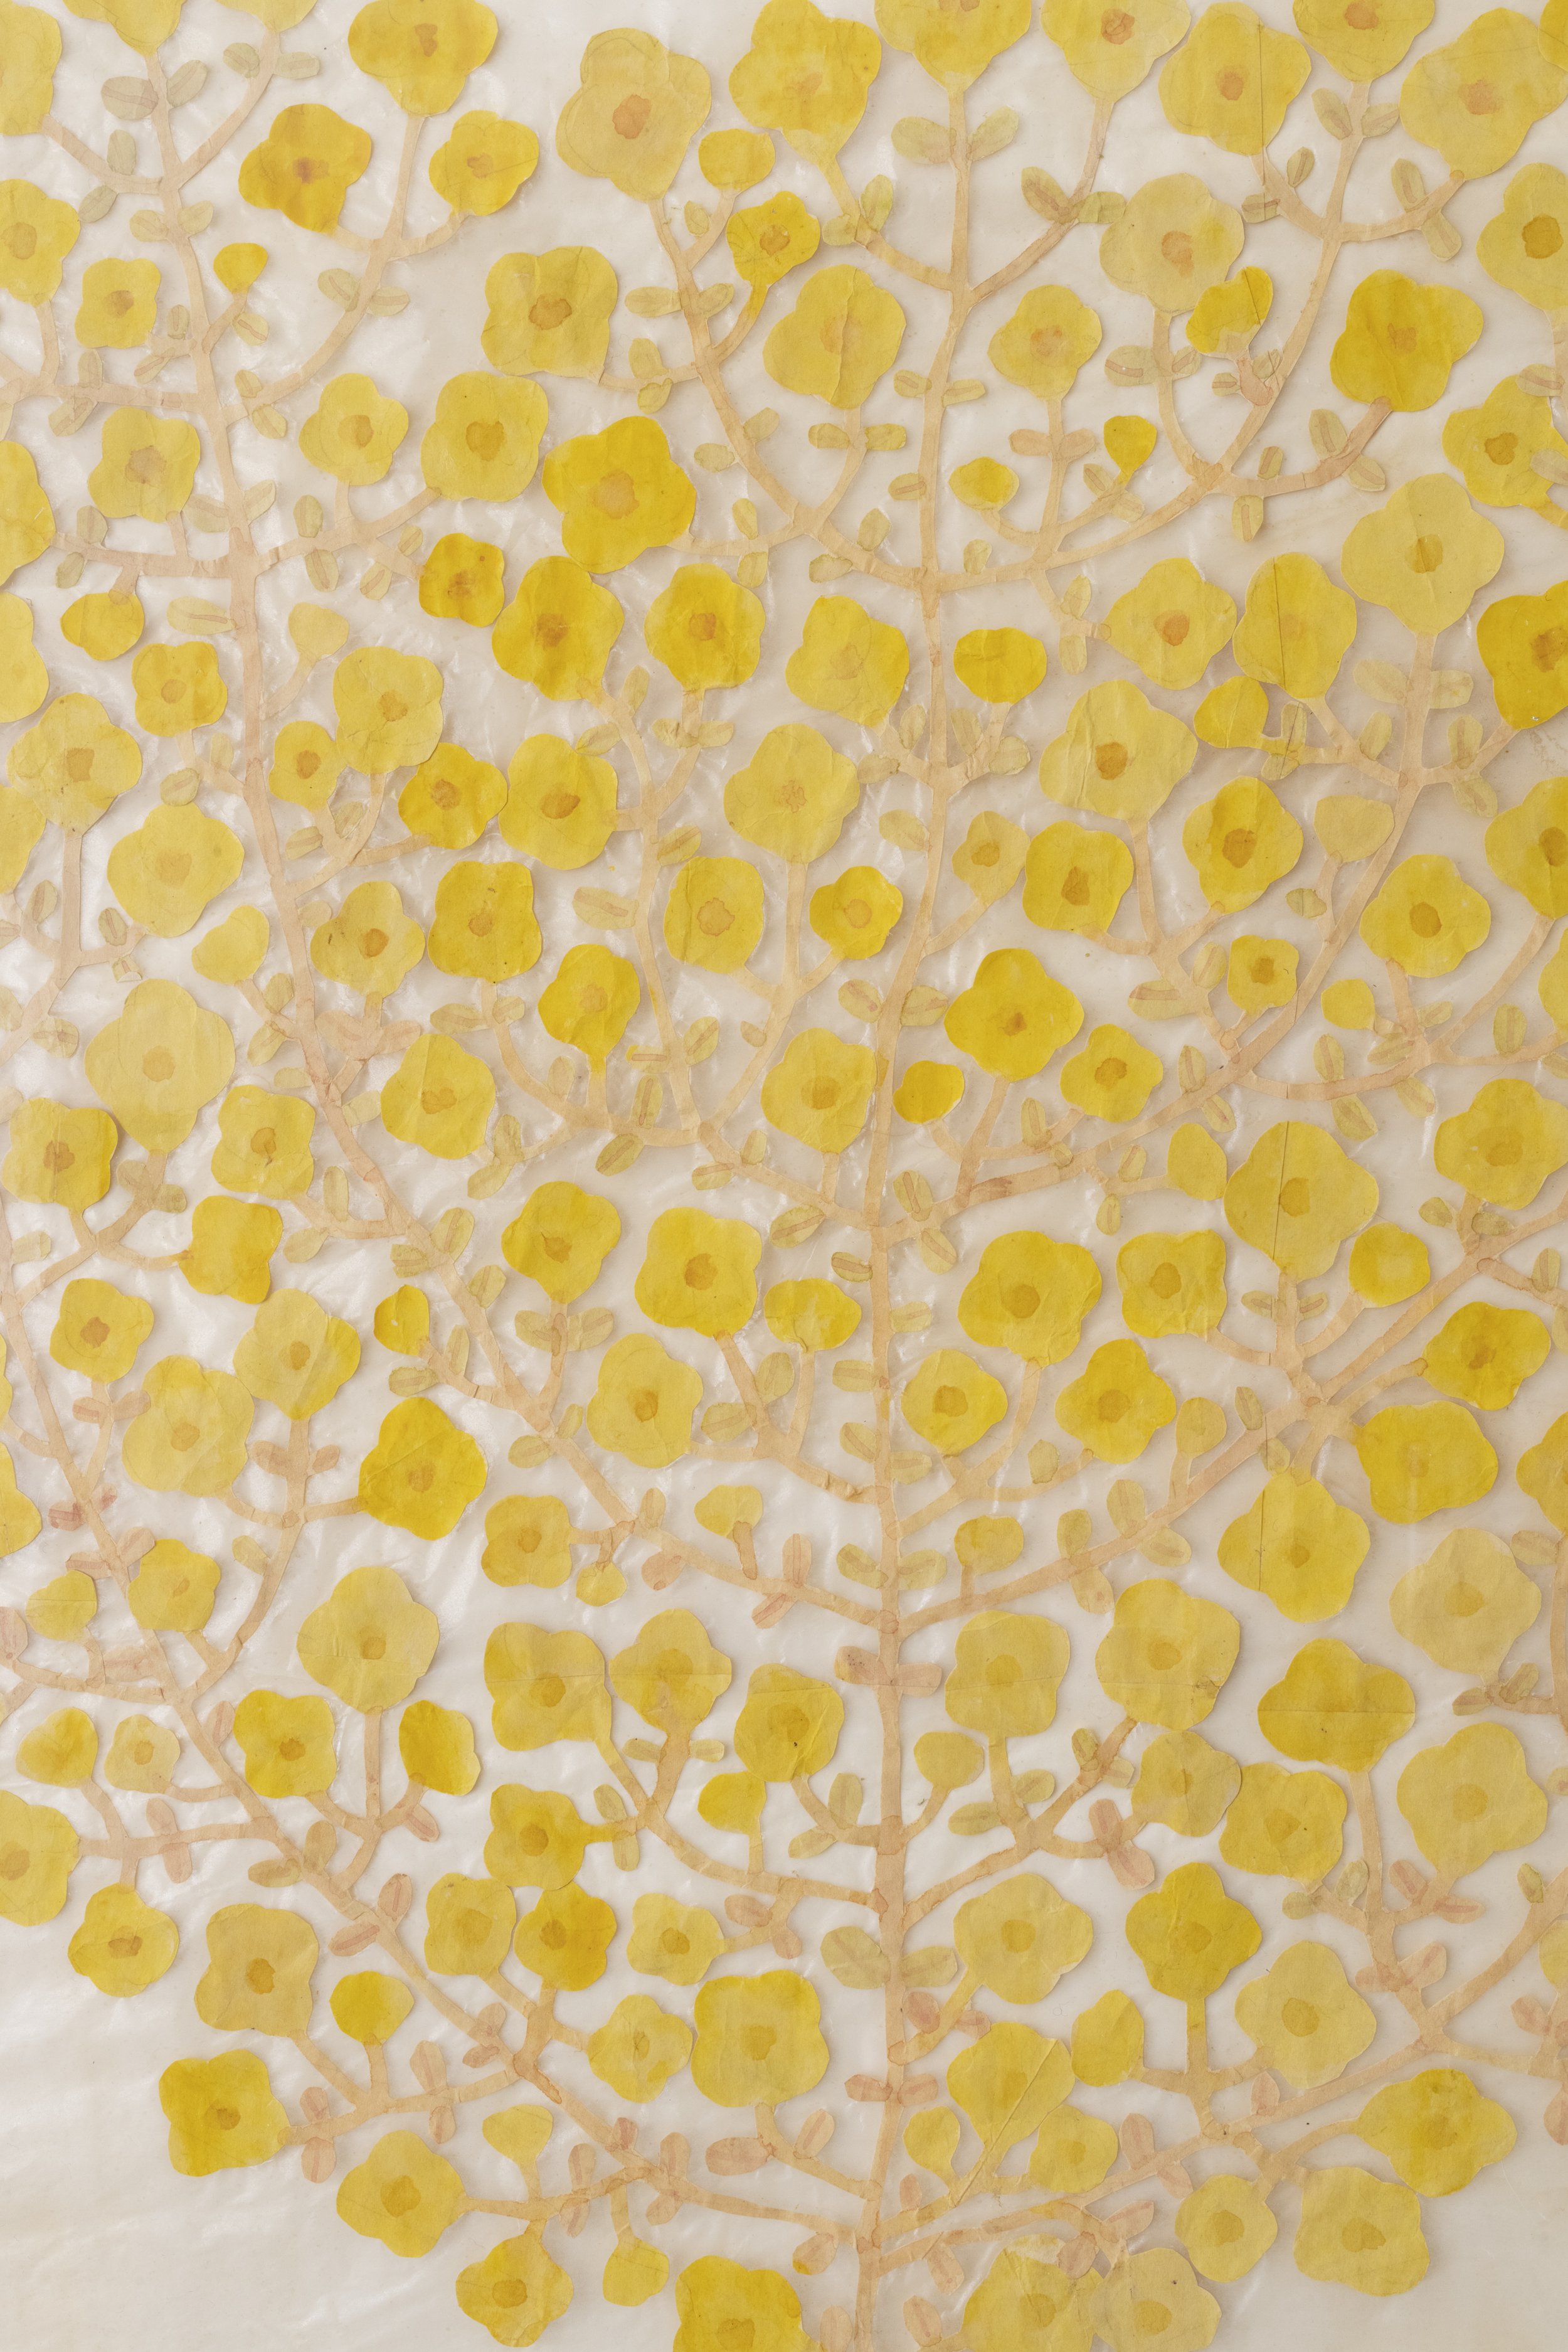 Fumi Imamura, One flower (yellow), 2022, collage, watercolor on paper, 66.5 x 43 cm (26 1_8 x 16 7_8 in) (unframed) 80 x 60 cm (31 1_2 x 23 5_8 in) (framed), REF 2441, detail.jpg